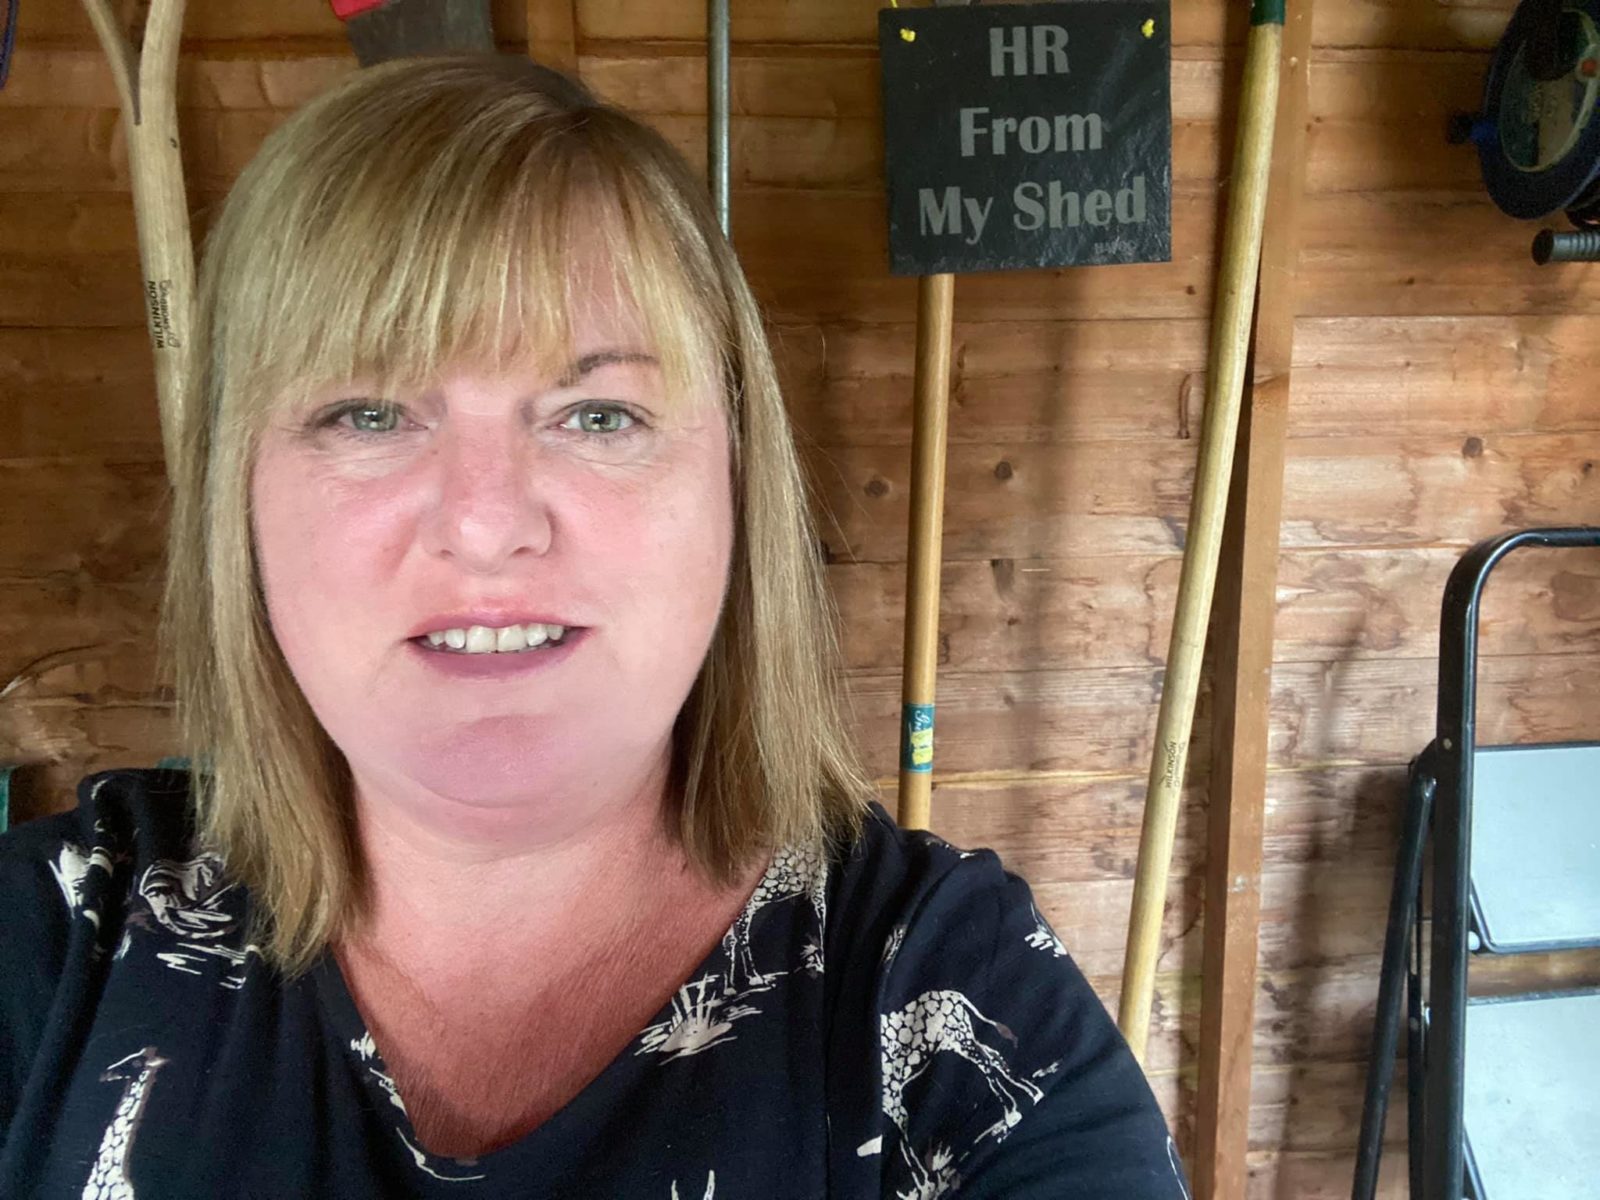 Meet The Welsh Hr Consultant Helping Businesses From Her Garden Shed 